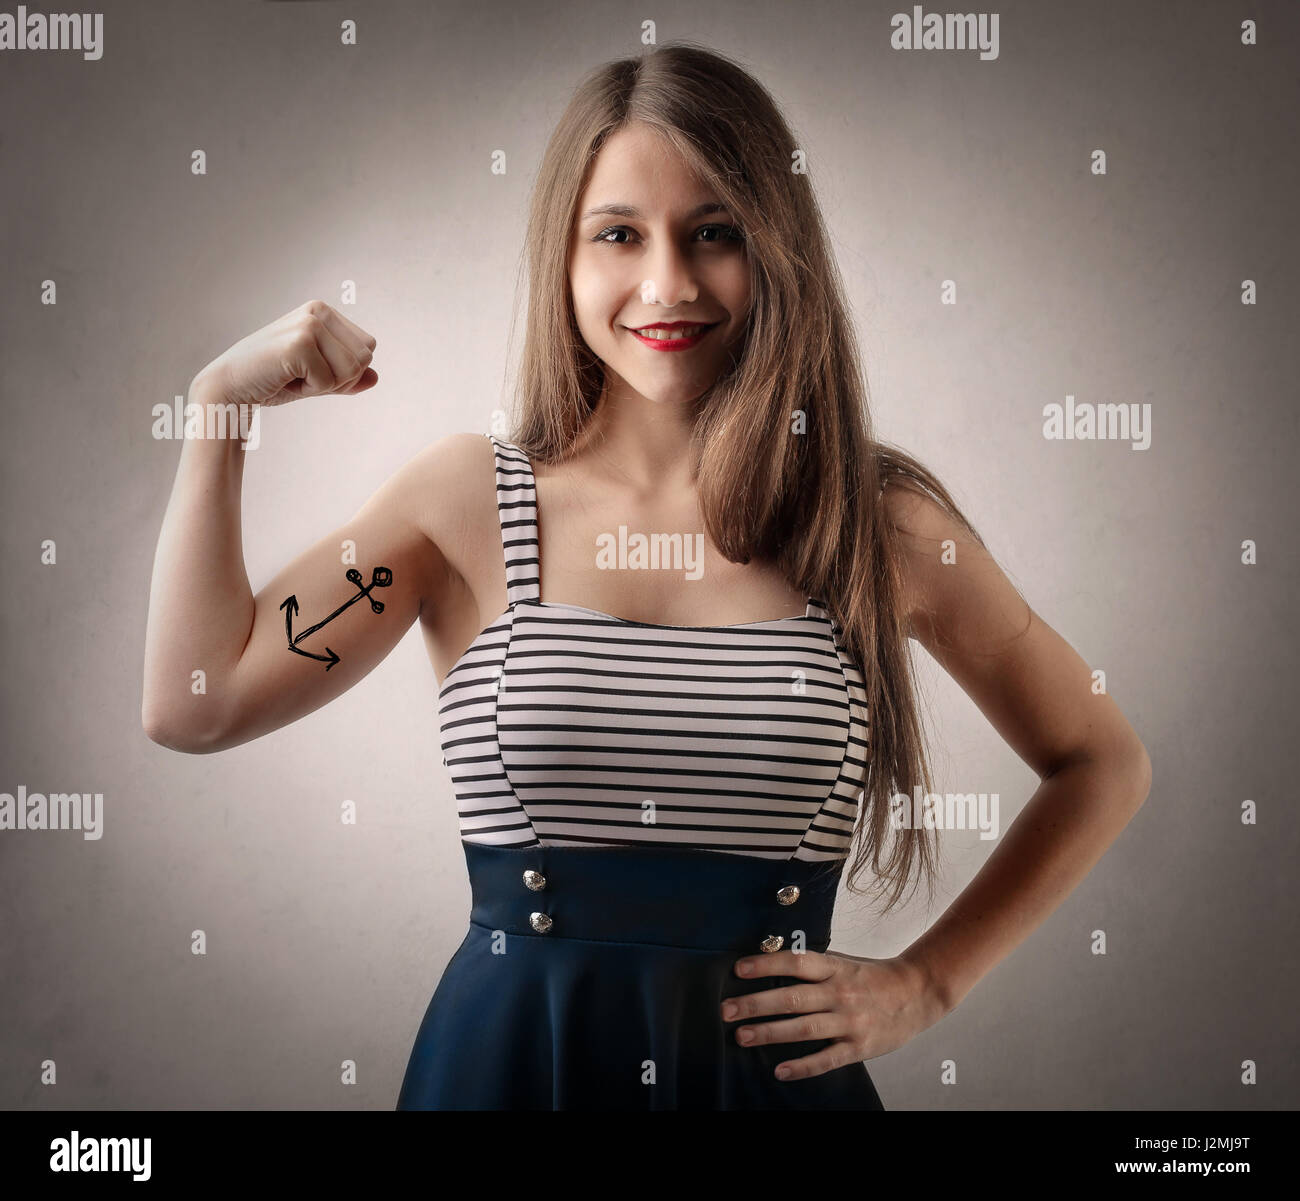 Strong woman with tattoo Banque D'Images